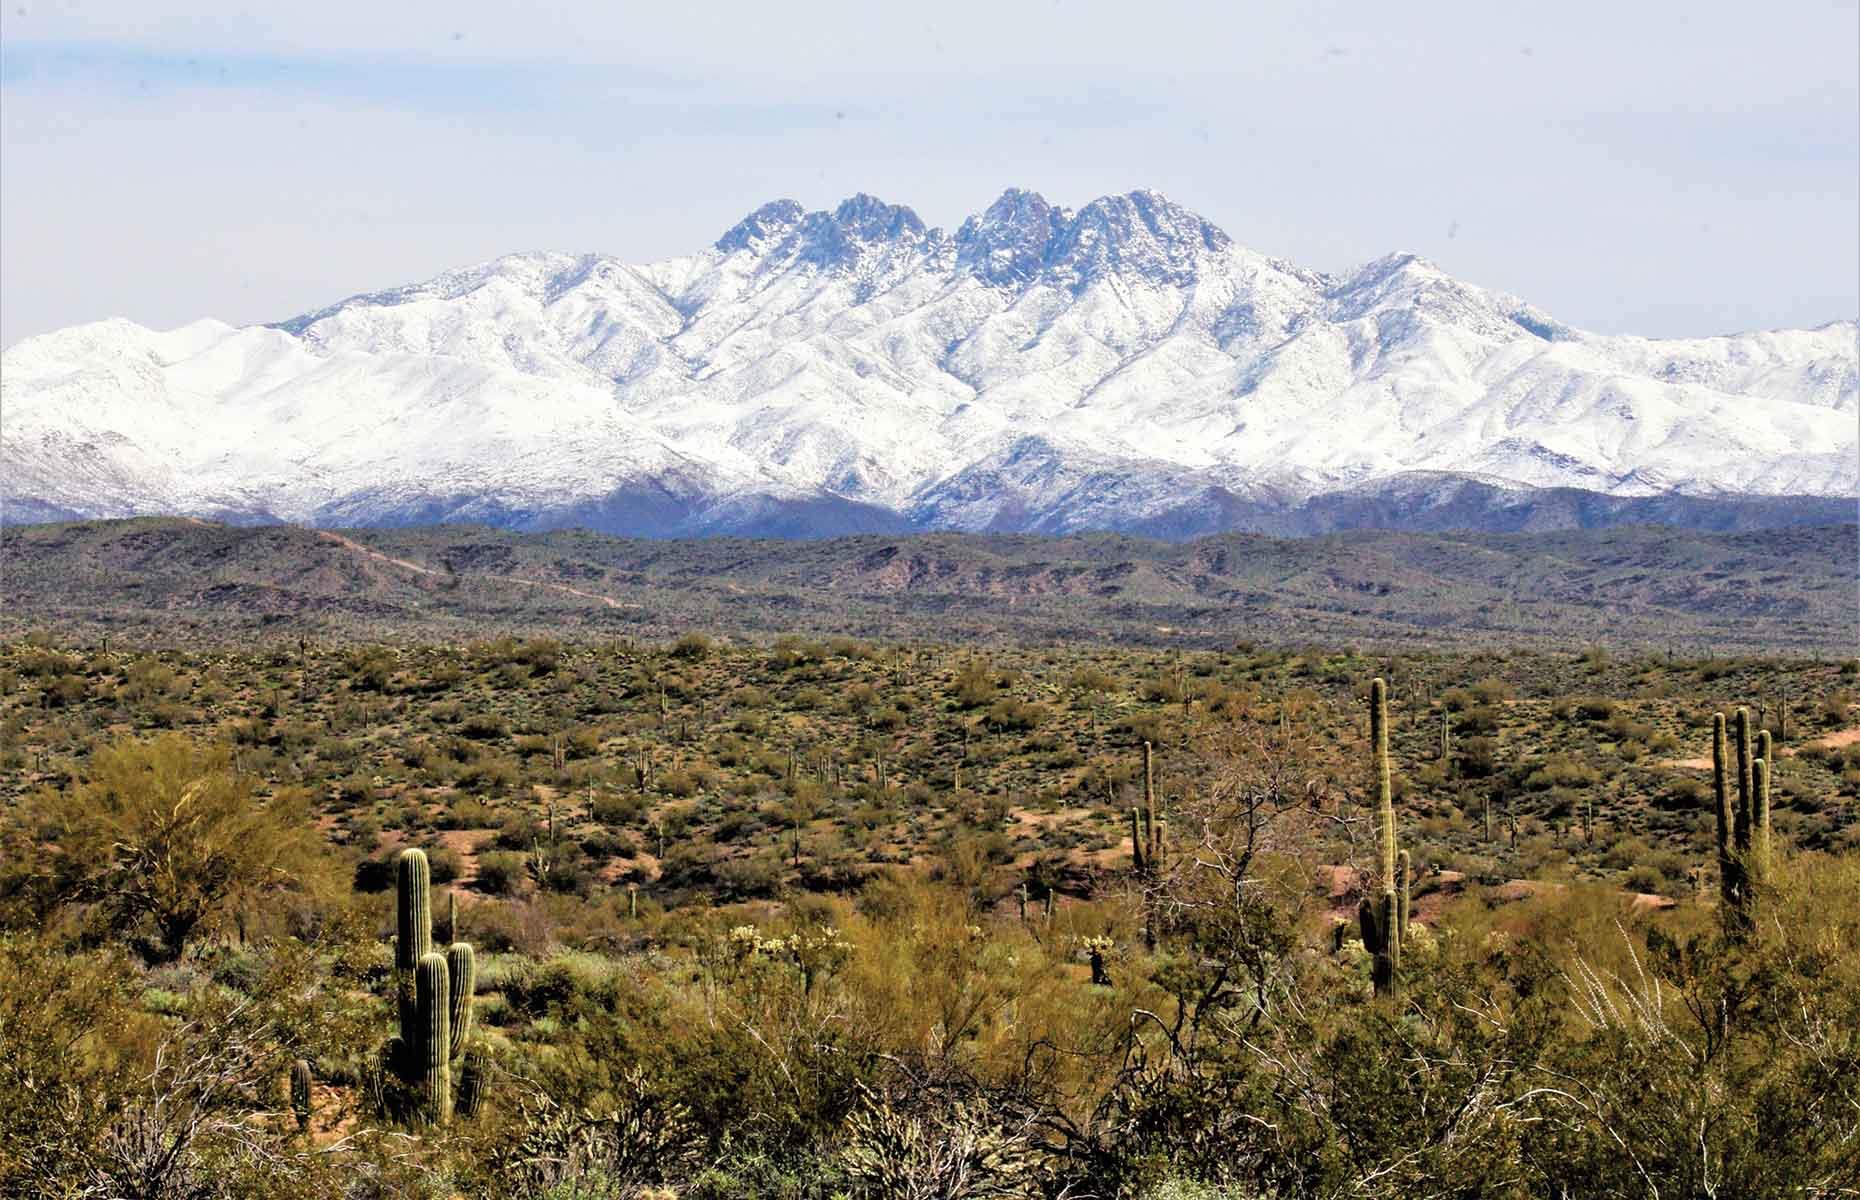 <p>Brush and pine-covered hillsides lead up to Four Peaks Mountain, part of the Mazatzal Mountains range in south-central Arizona. The vegetation ranges from desert shrub at lower altitudes up to grassland, with the evergreen manzanita shrub and shrub live oak at higher levels.</p>  <p><a href="https://www.loveexploring.com/galleries/132992/americas-most-beautiful-wildernesses?page=1"><strong>Discover America's most beautiful wildernesses</strong></a></p>